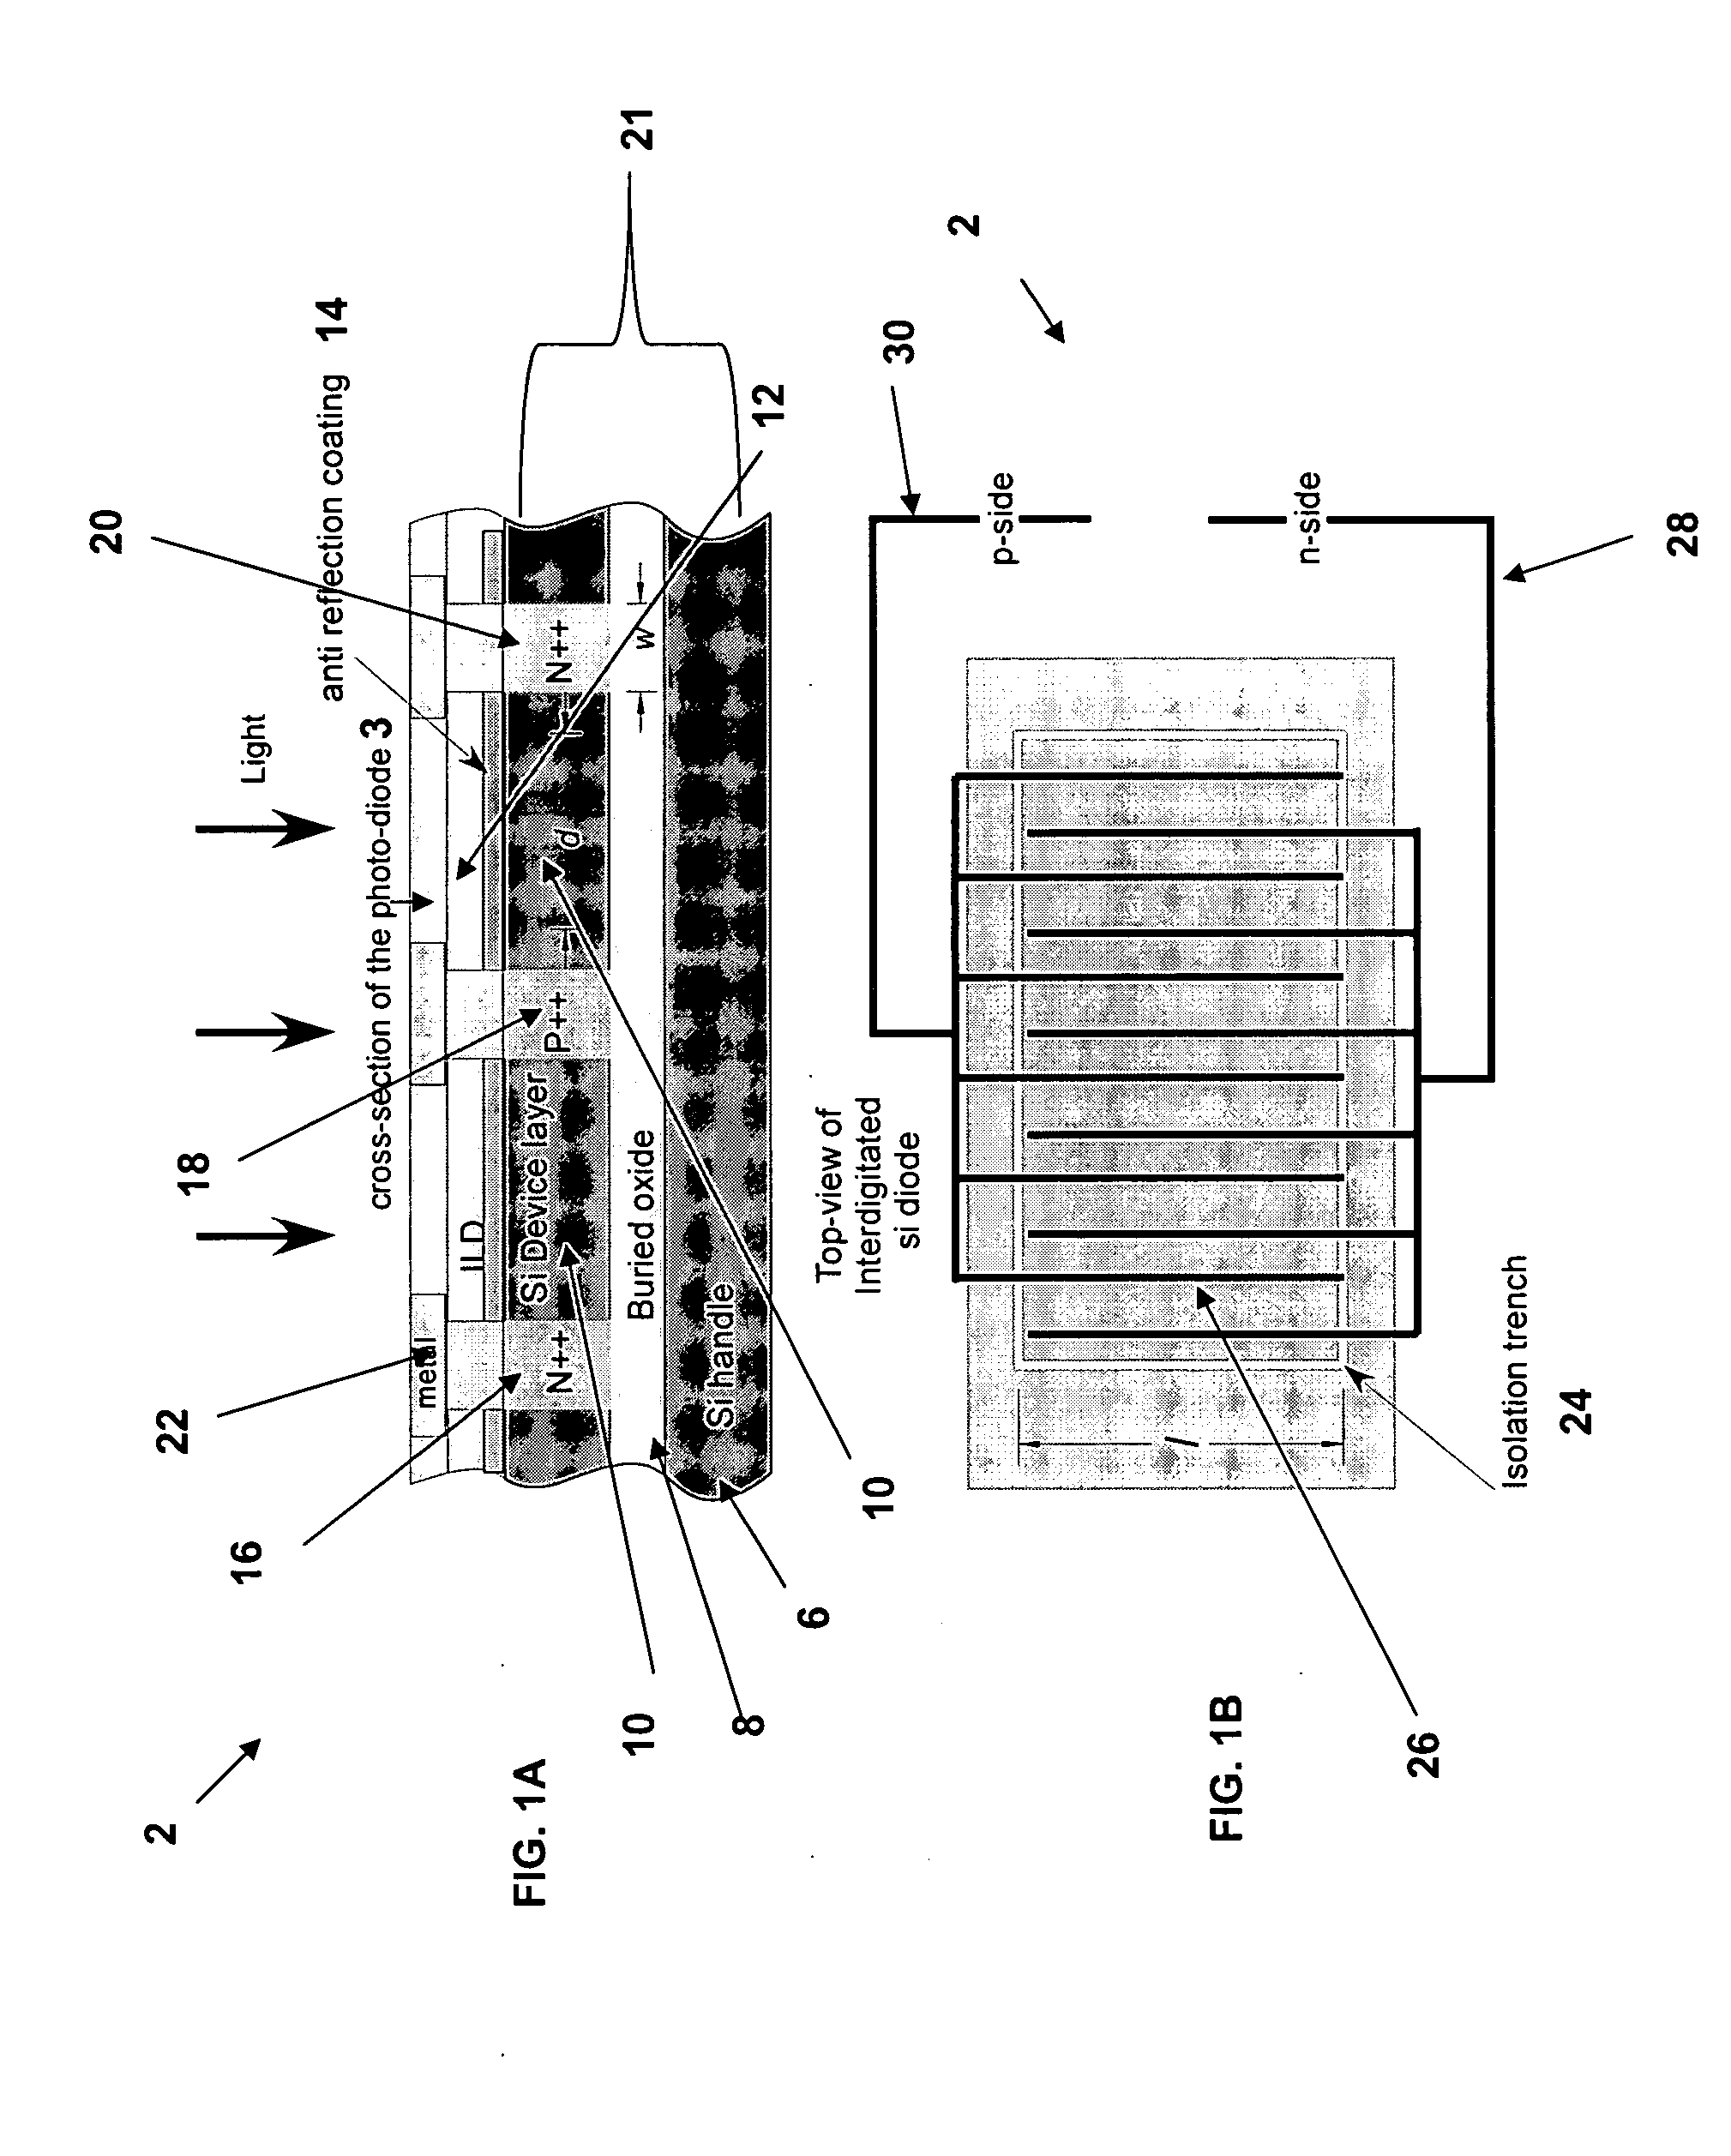 Inter-digitated silicon photodiode based optical receiver on SOI